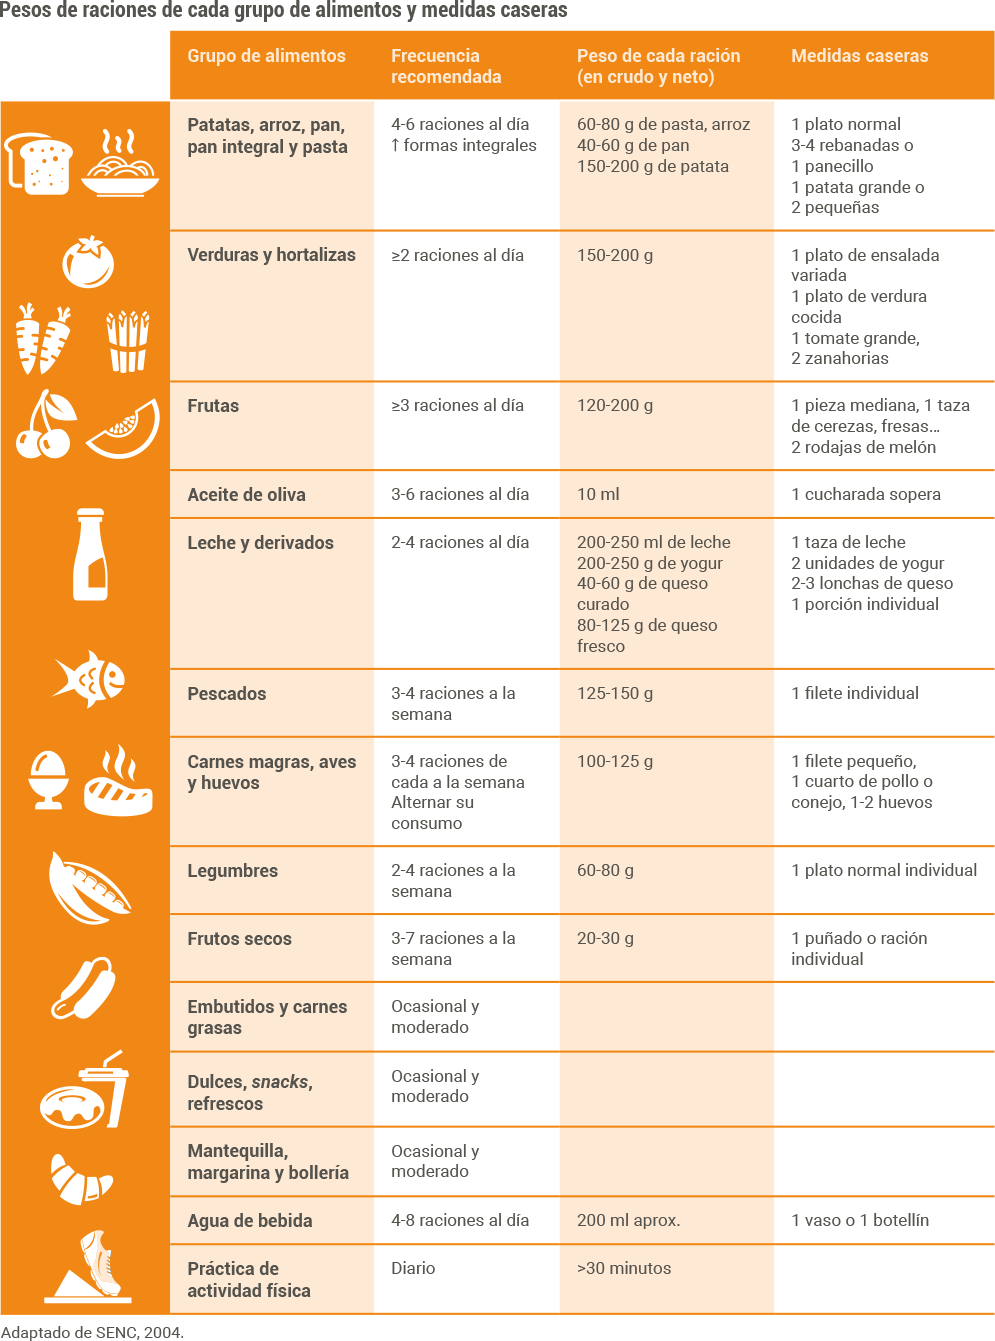 Table of portion weights and homemade measurements for children's meals from the AEDP Nutrition Manual